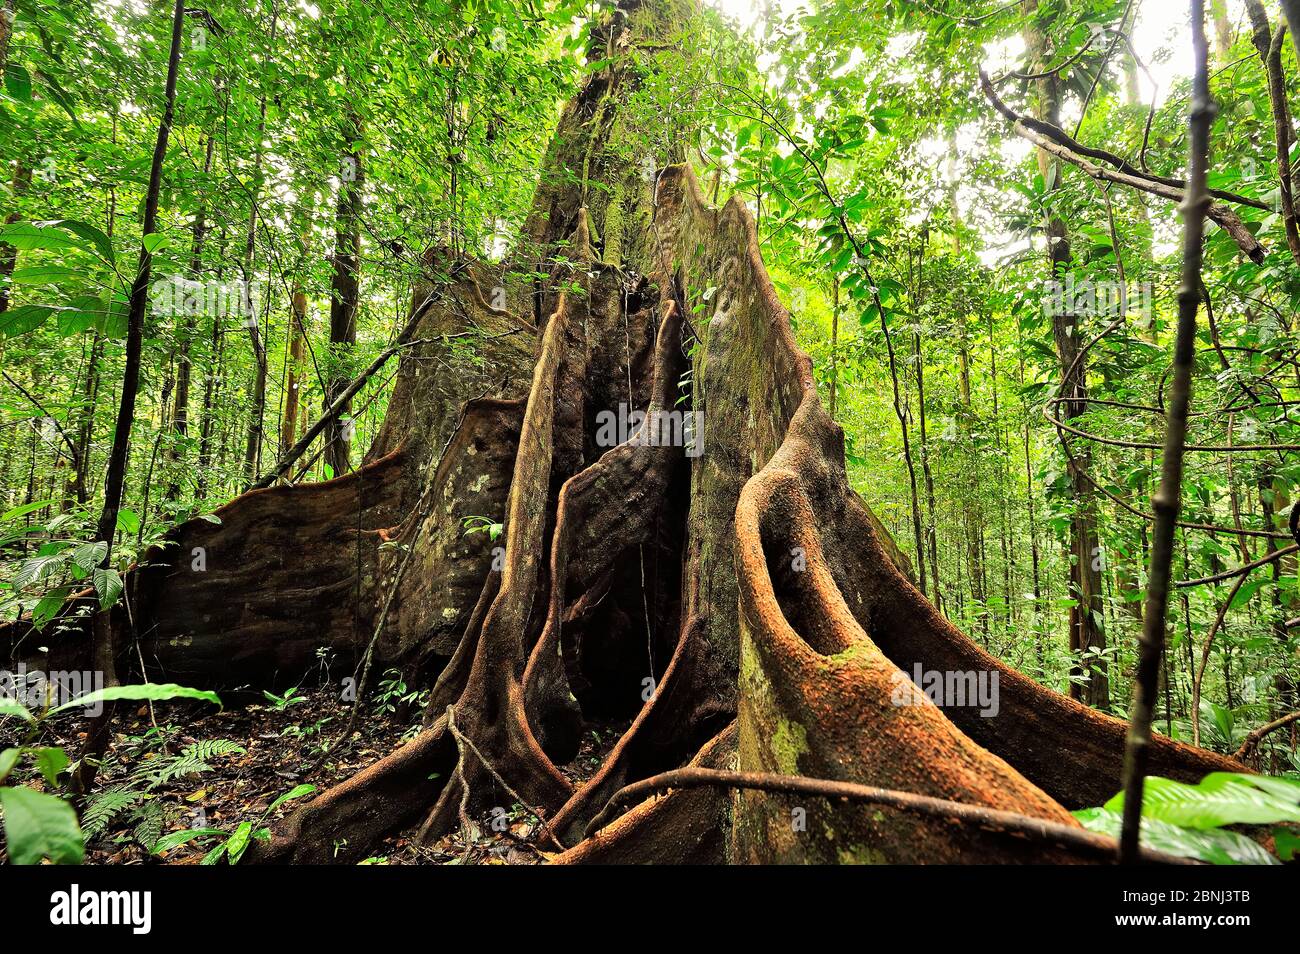 Tropical rainforest tree with large buttress roots, French Guiana Stock Photo